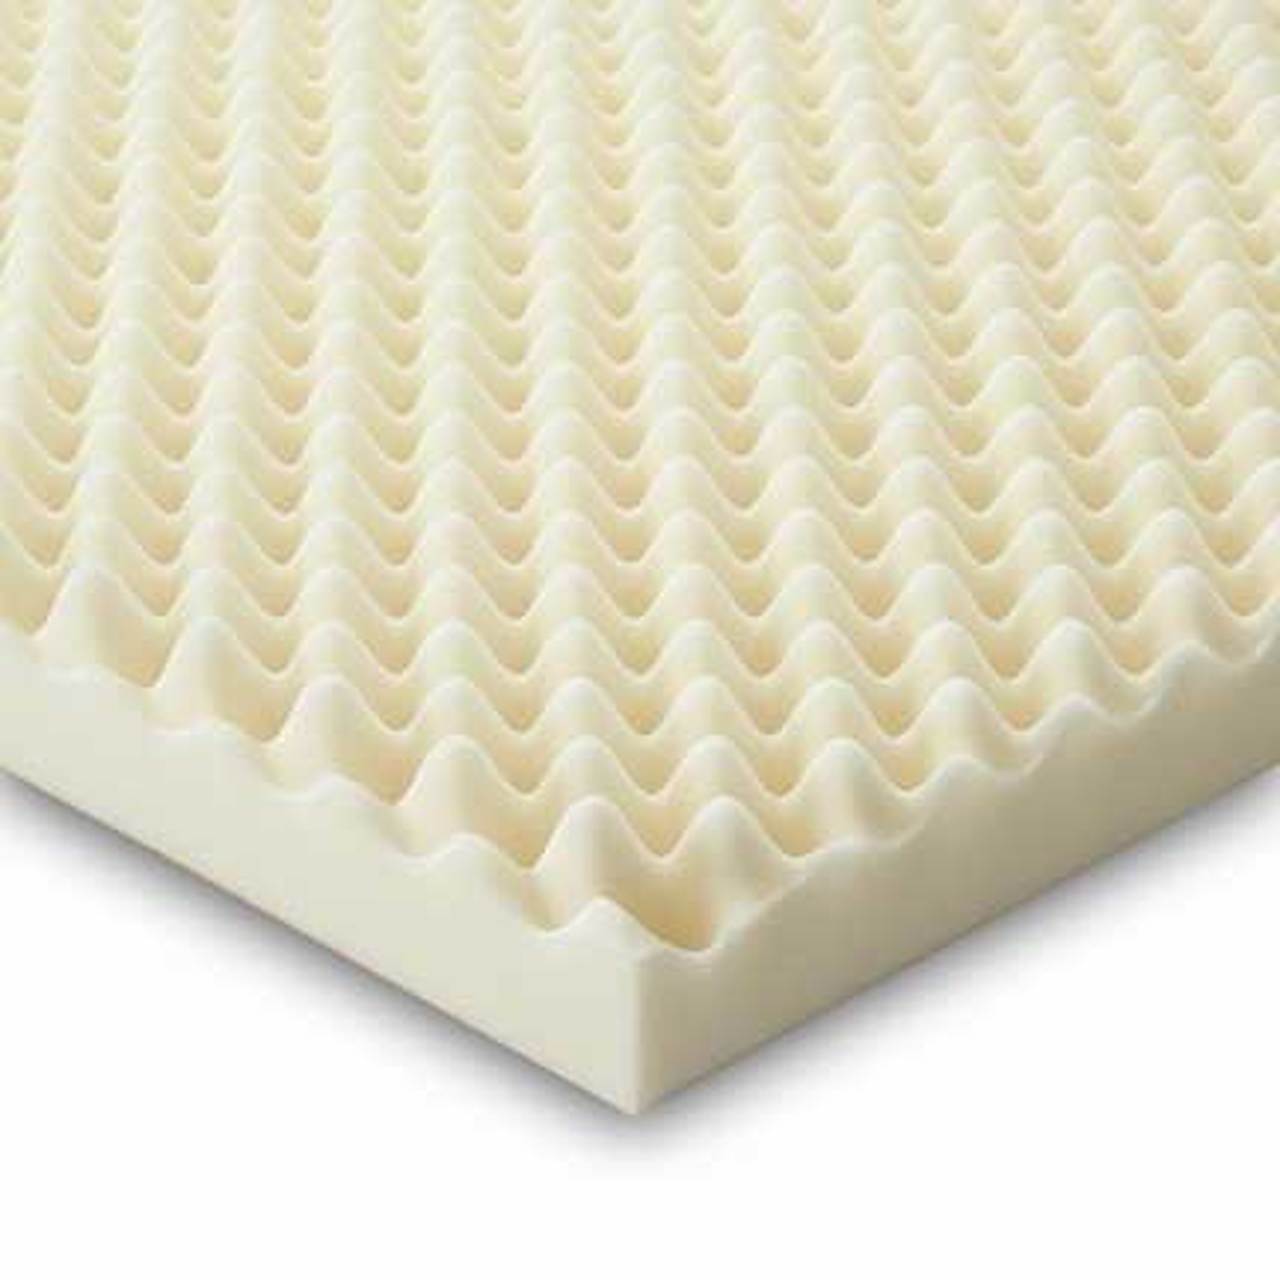 JLH reasonable custom made mattress widely-use for home-4